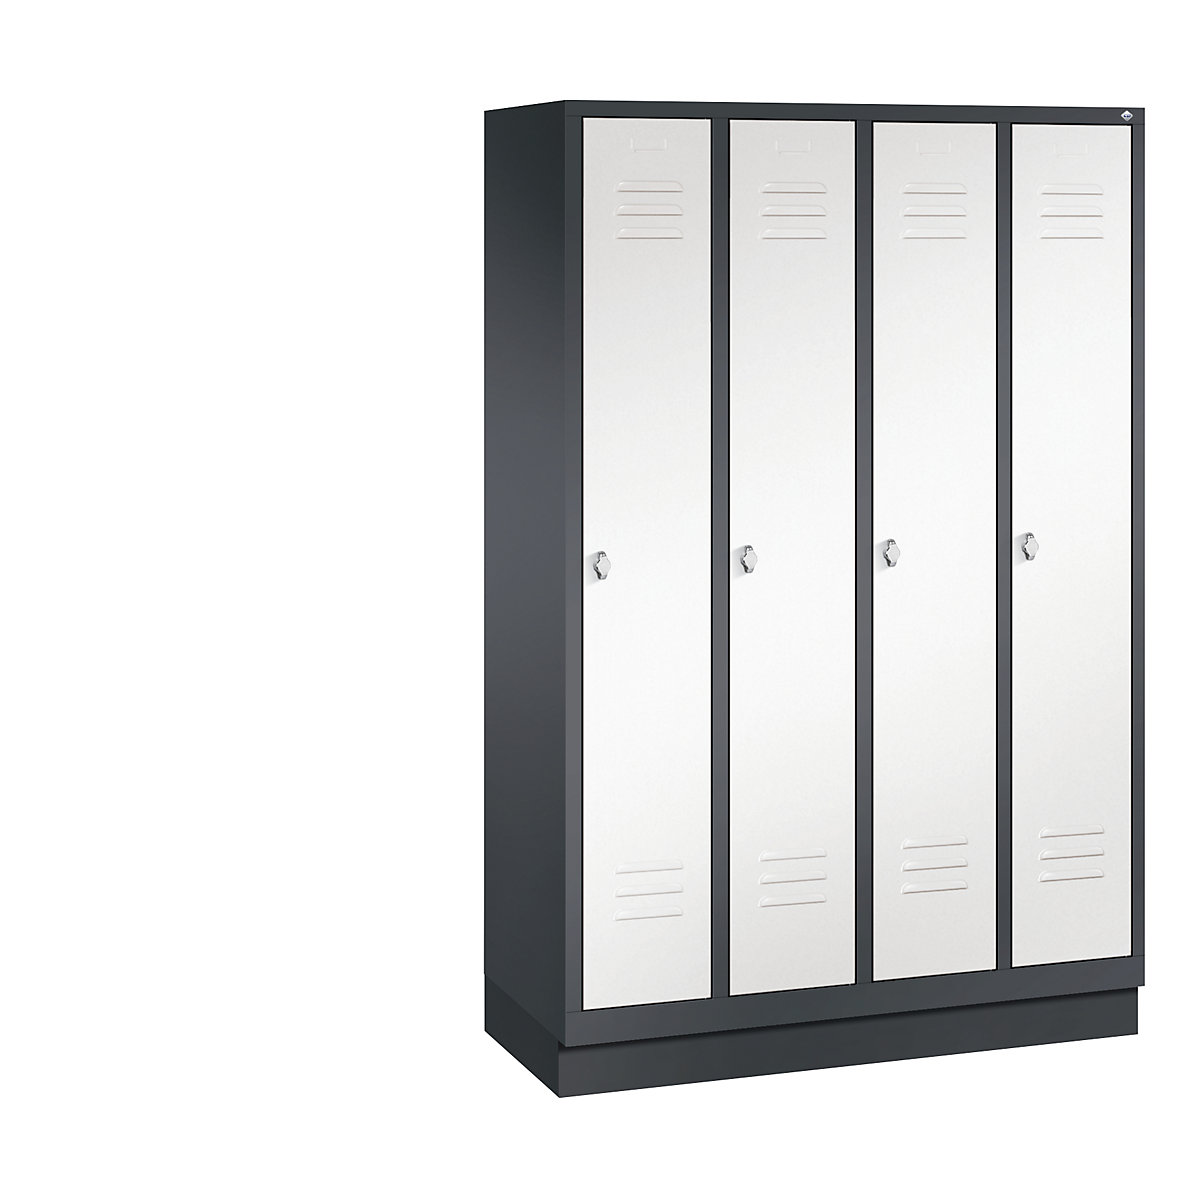 CLASSIC cloakroom locker with plinth – C+P, 4 compartments, compartment width 300 mm, black grey / traffic white-10